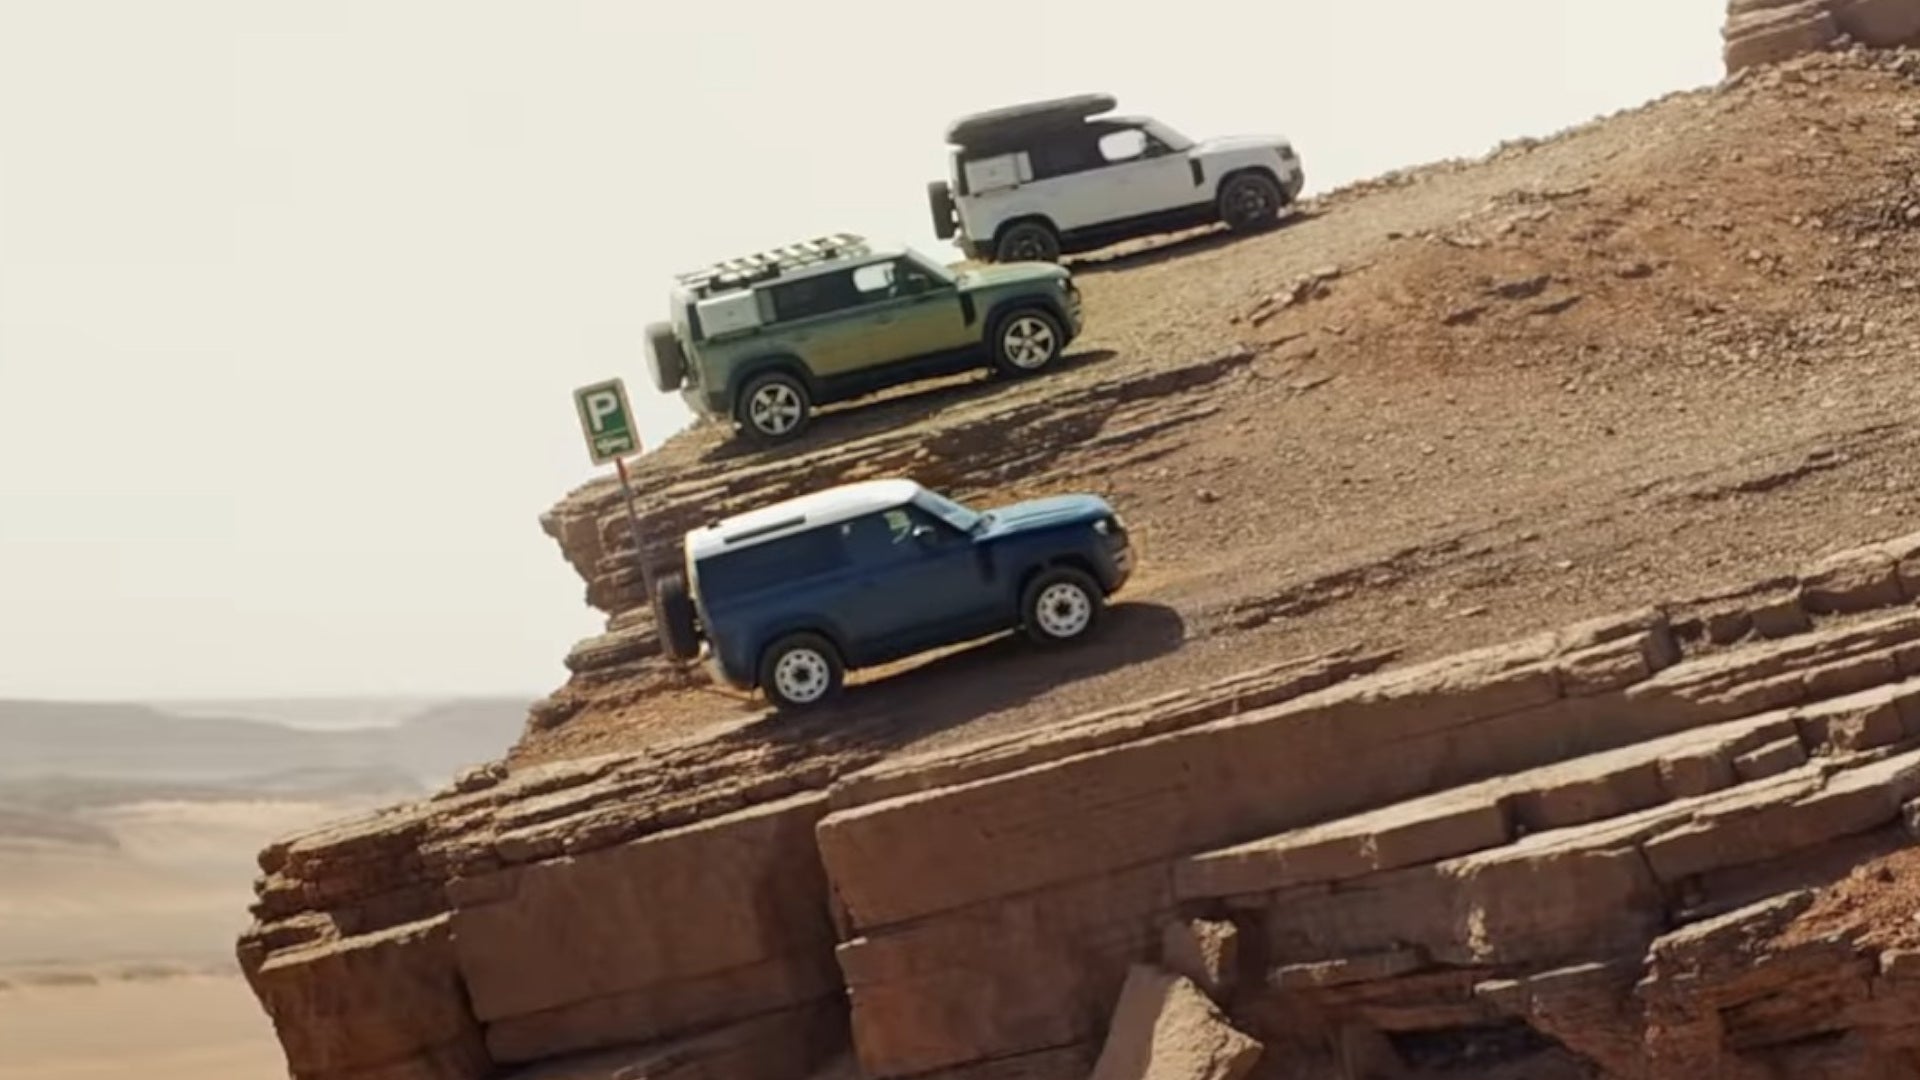 Dangerous Cliff Edge Scene Gets Land Rover Ads Banned in UK